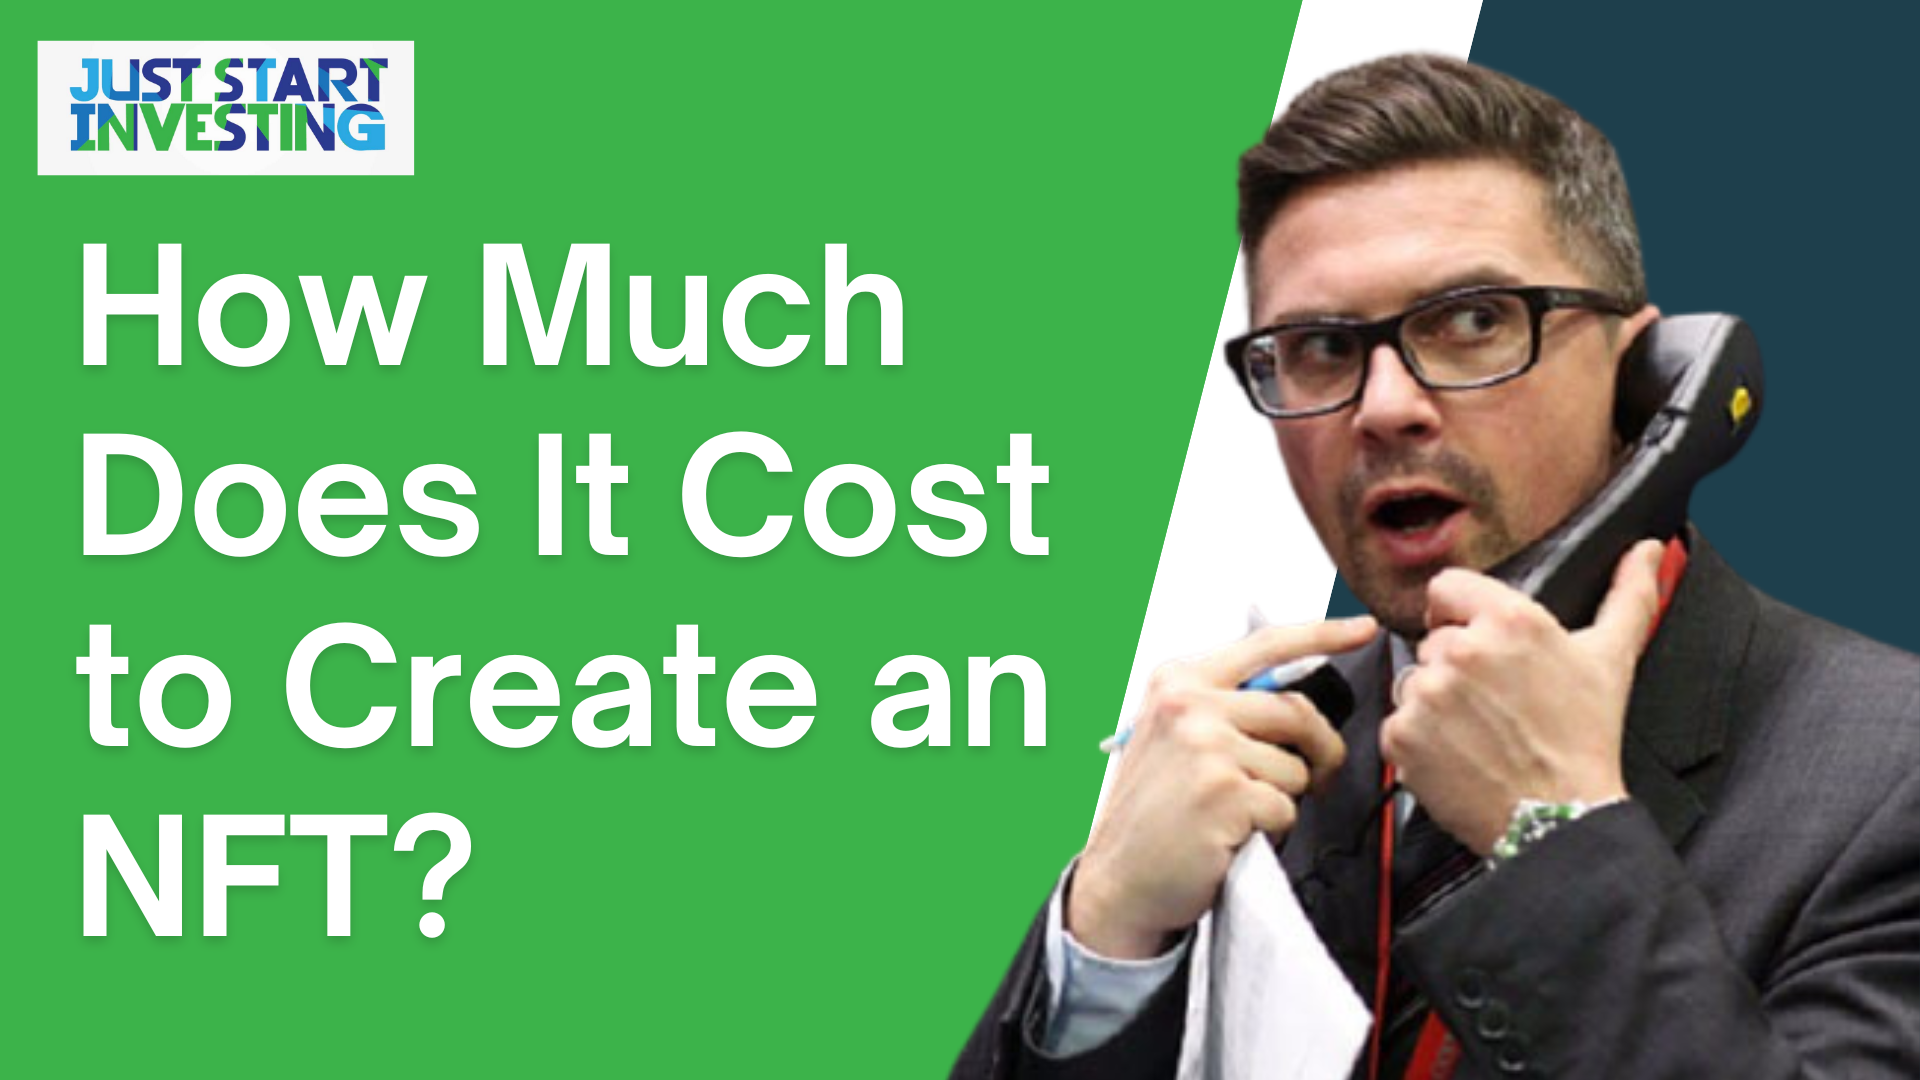 How Much Does It Cost to Create an NFT